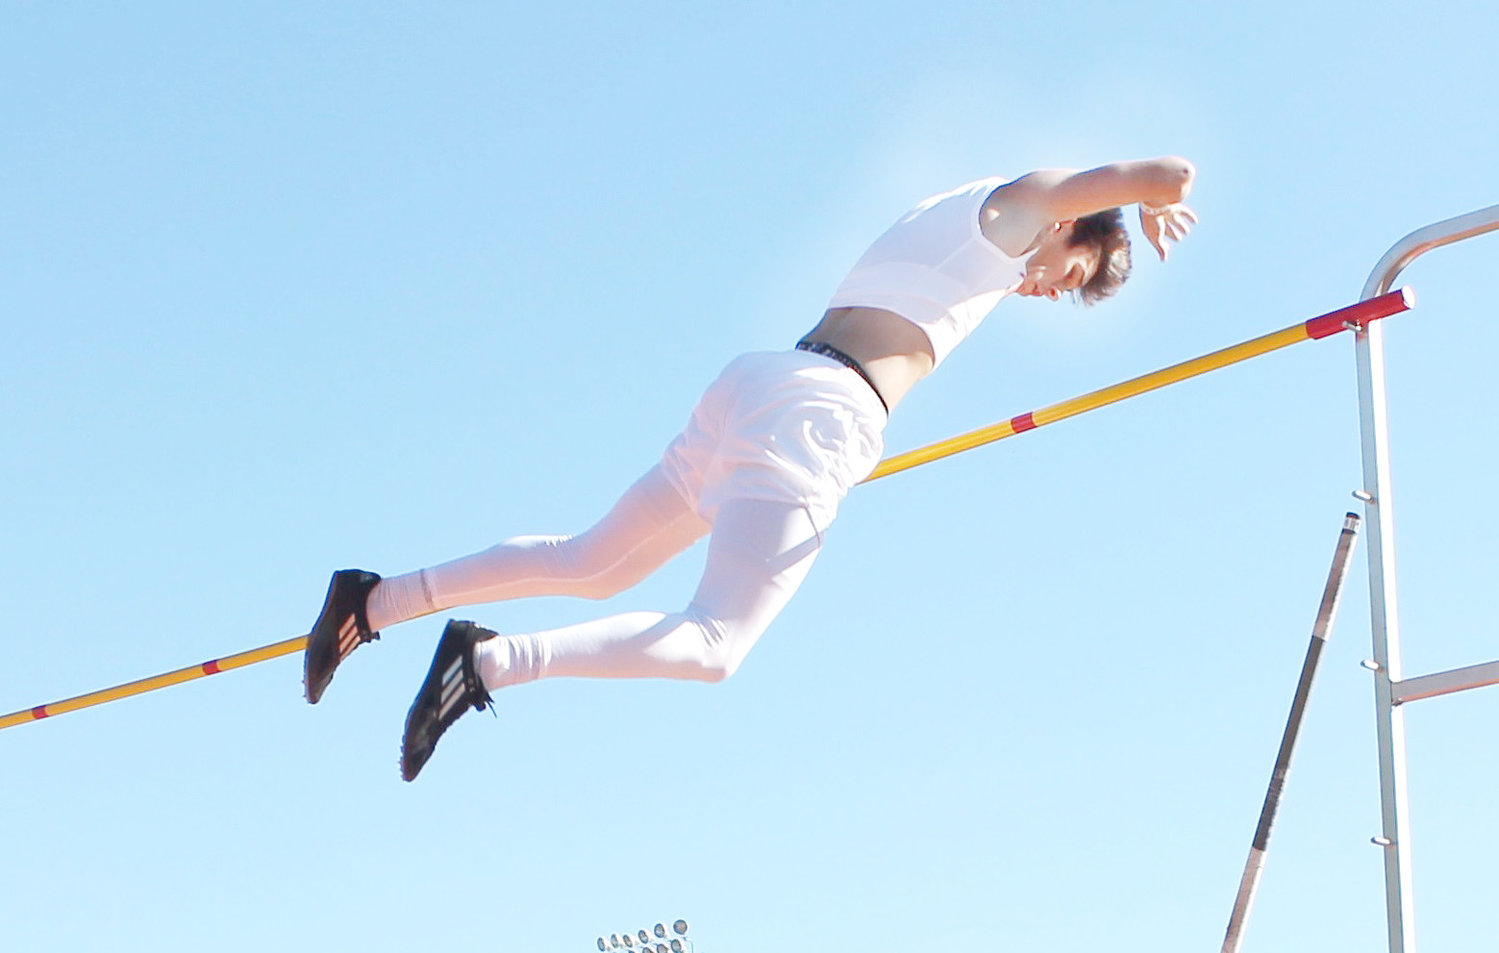 Mineola senior Cameron Hays took first place in the Pole Vault in the area track meet in Eustace and will head to Whitehouse for regional on Friday.